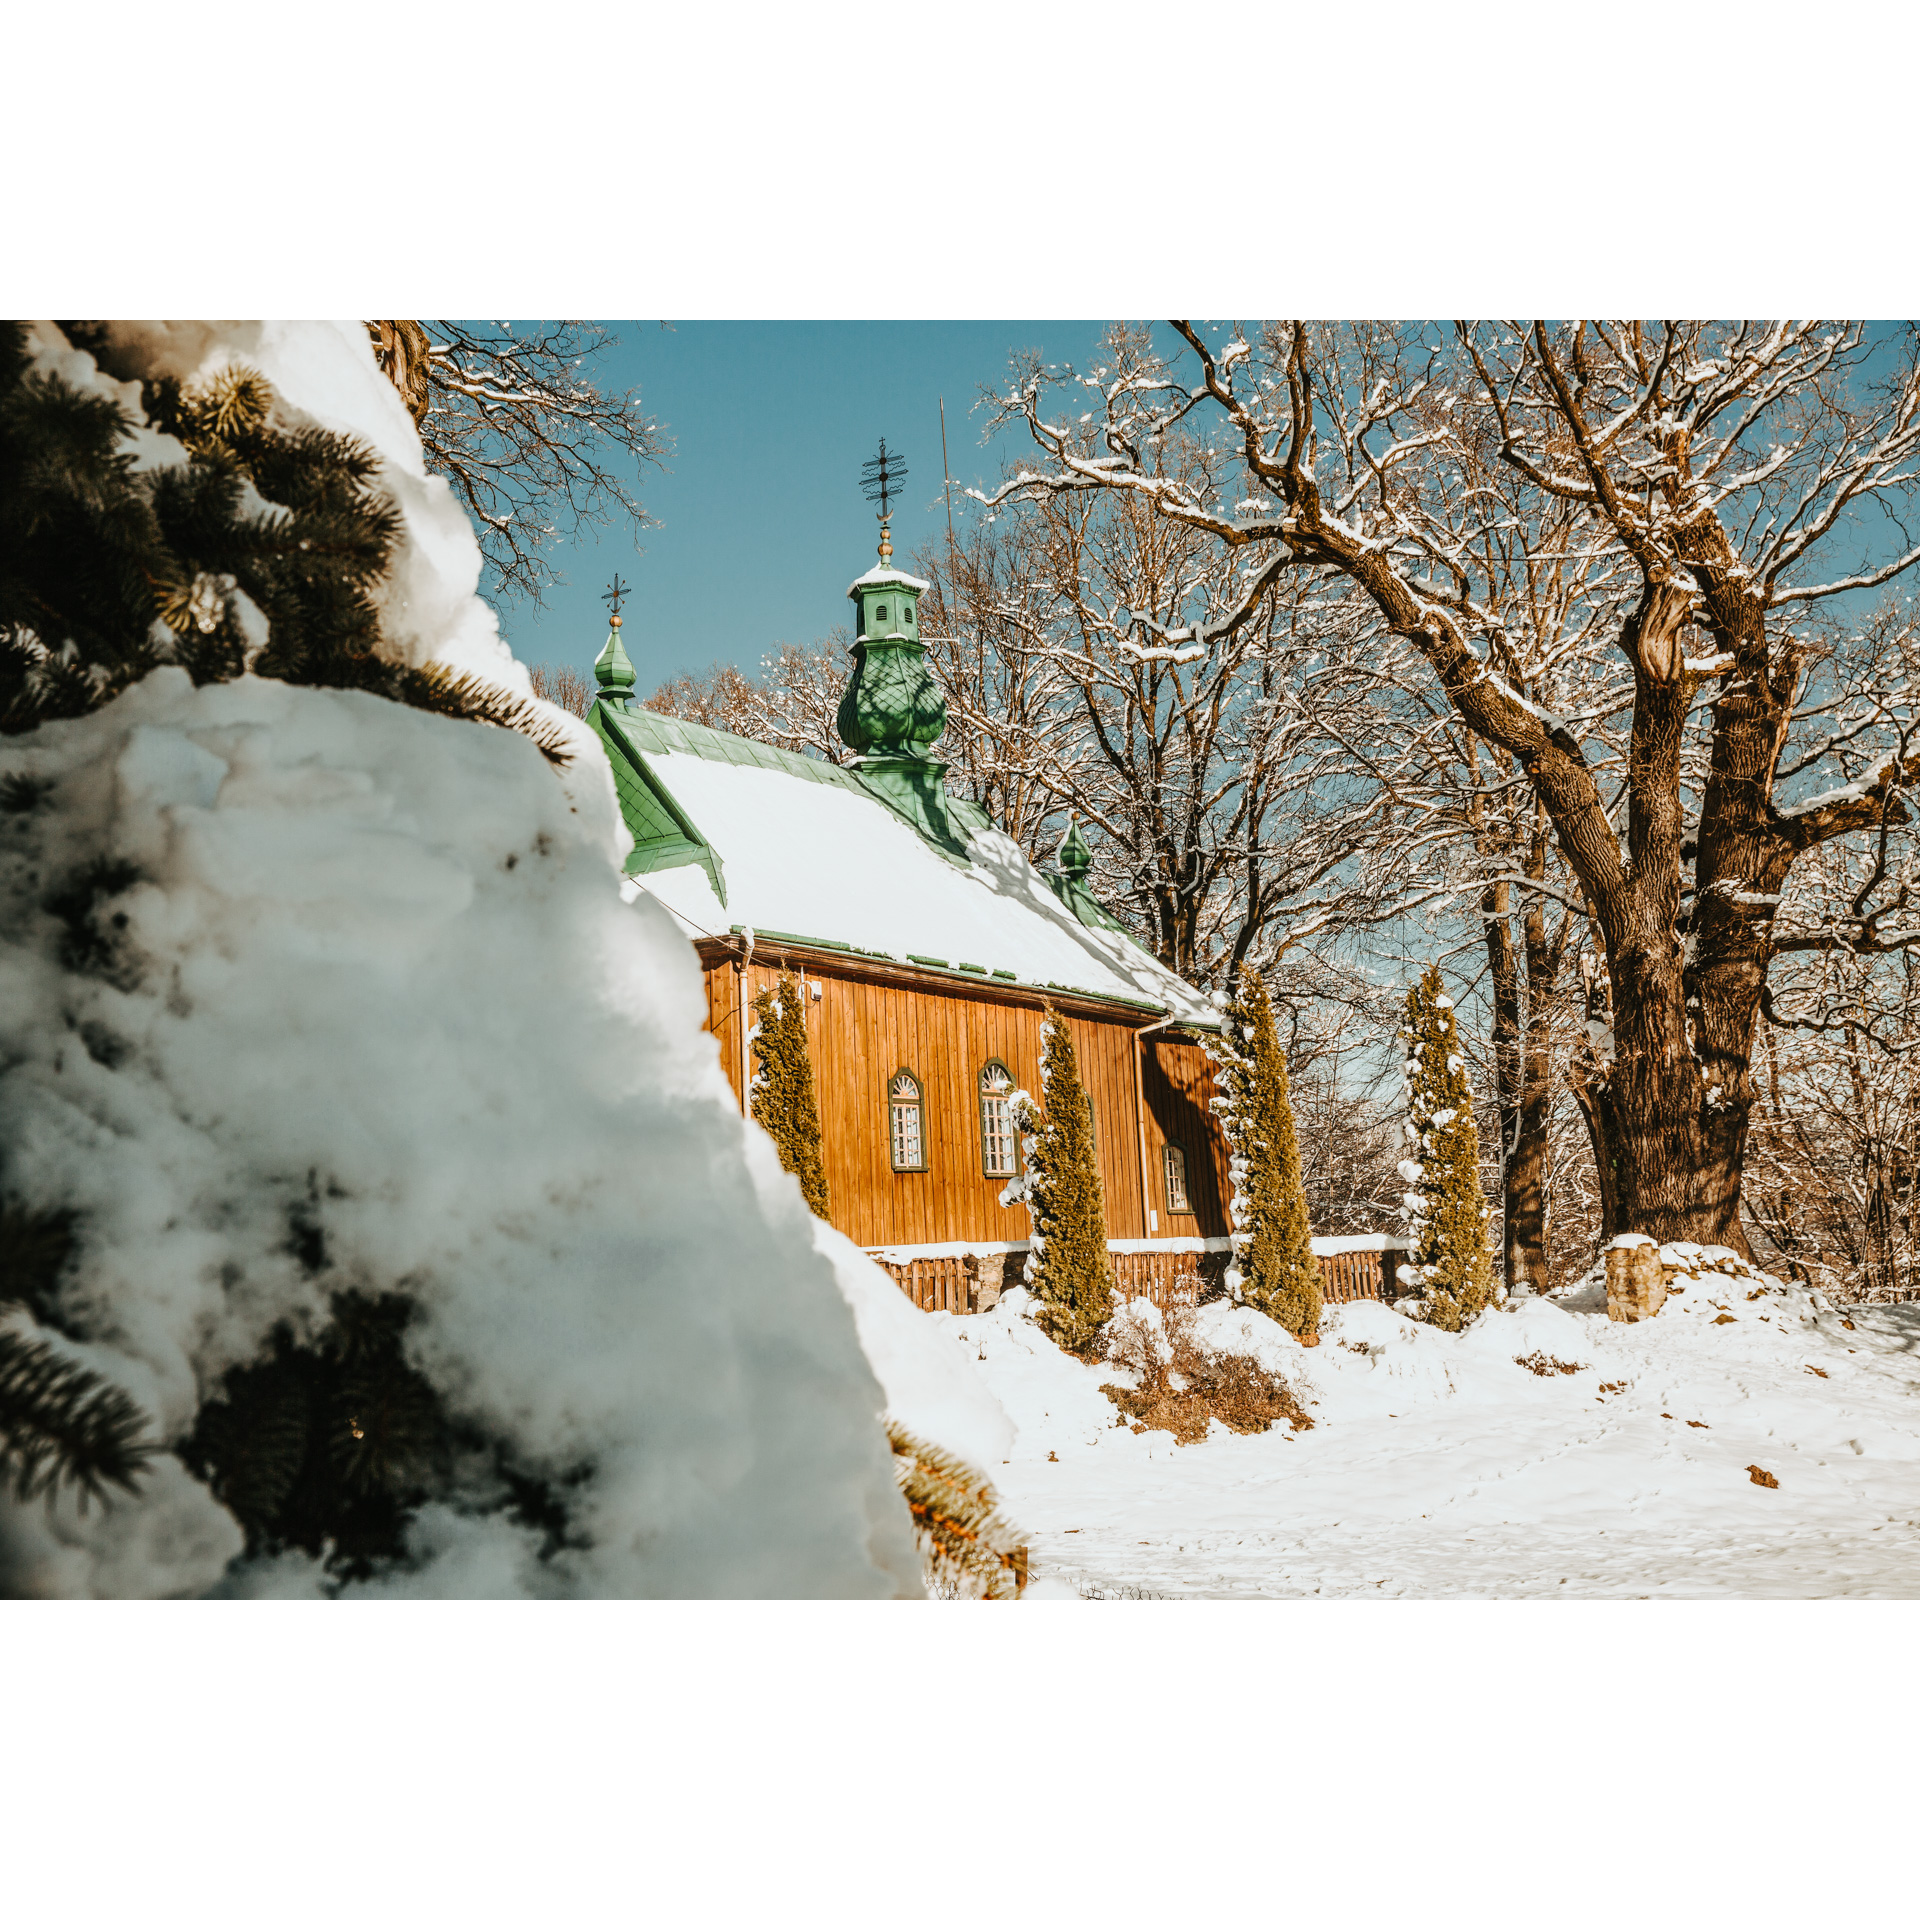 A wooden church with a green roof and turrets with a cross seen from behind a snow-covered coniferous tree